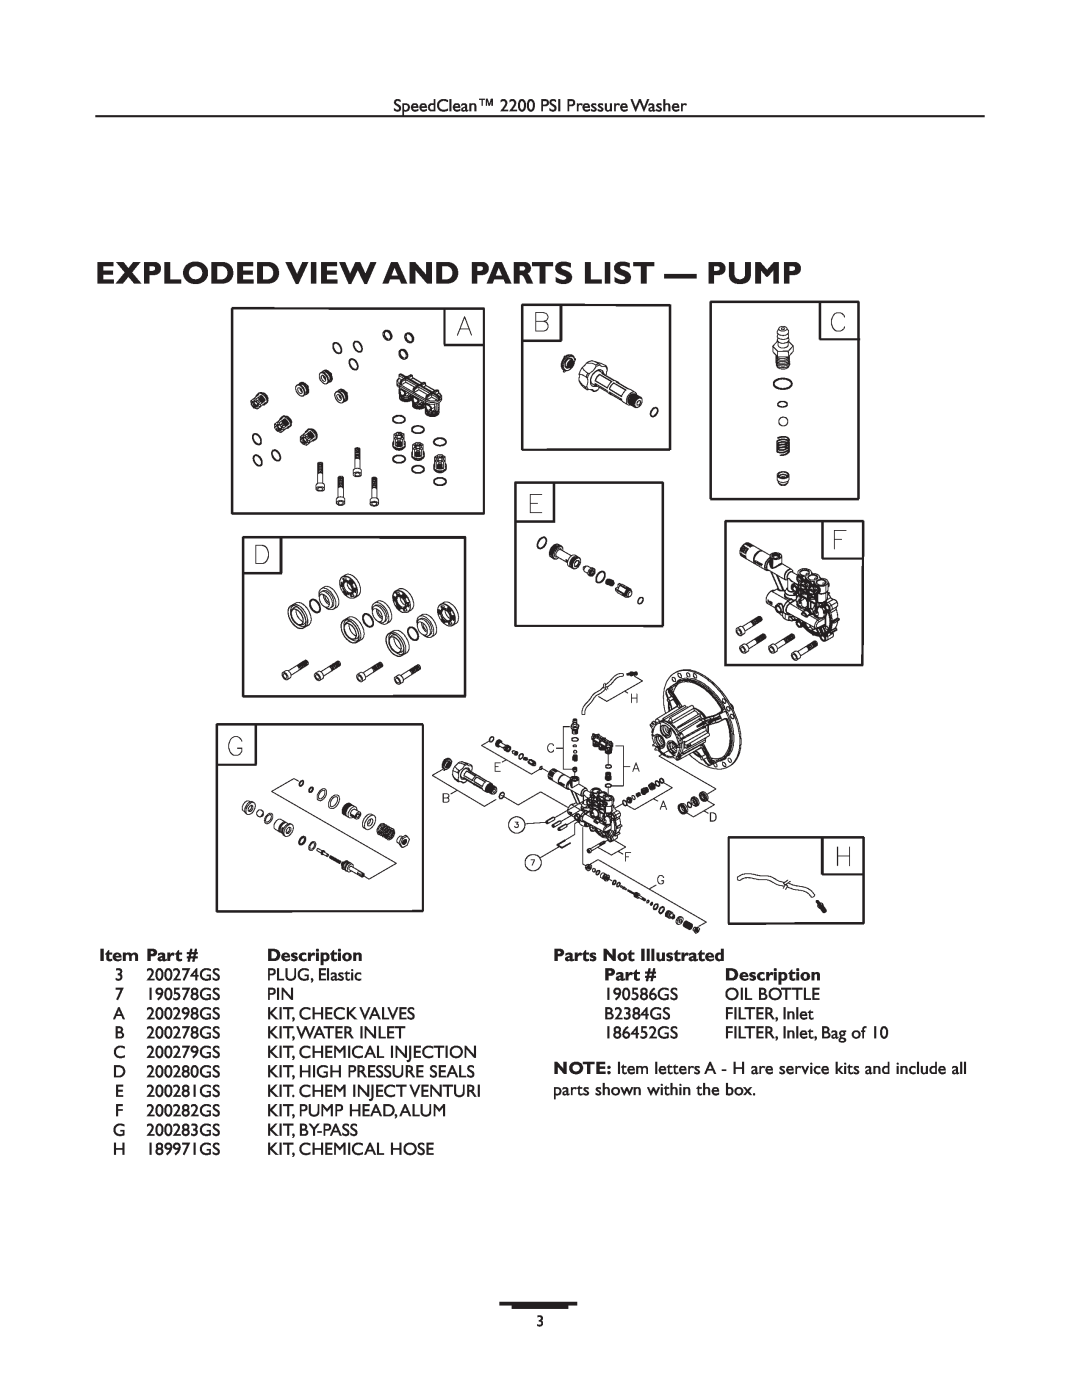 Briggs & Stratton 020261-1 manual Exploded View And Parts List - Pump, Description, Parts Not Illustrated 